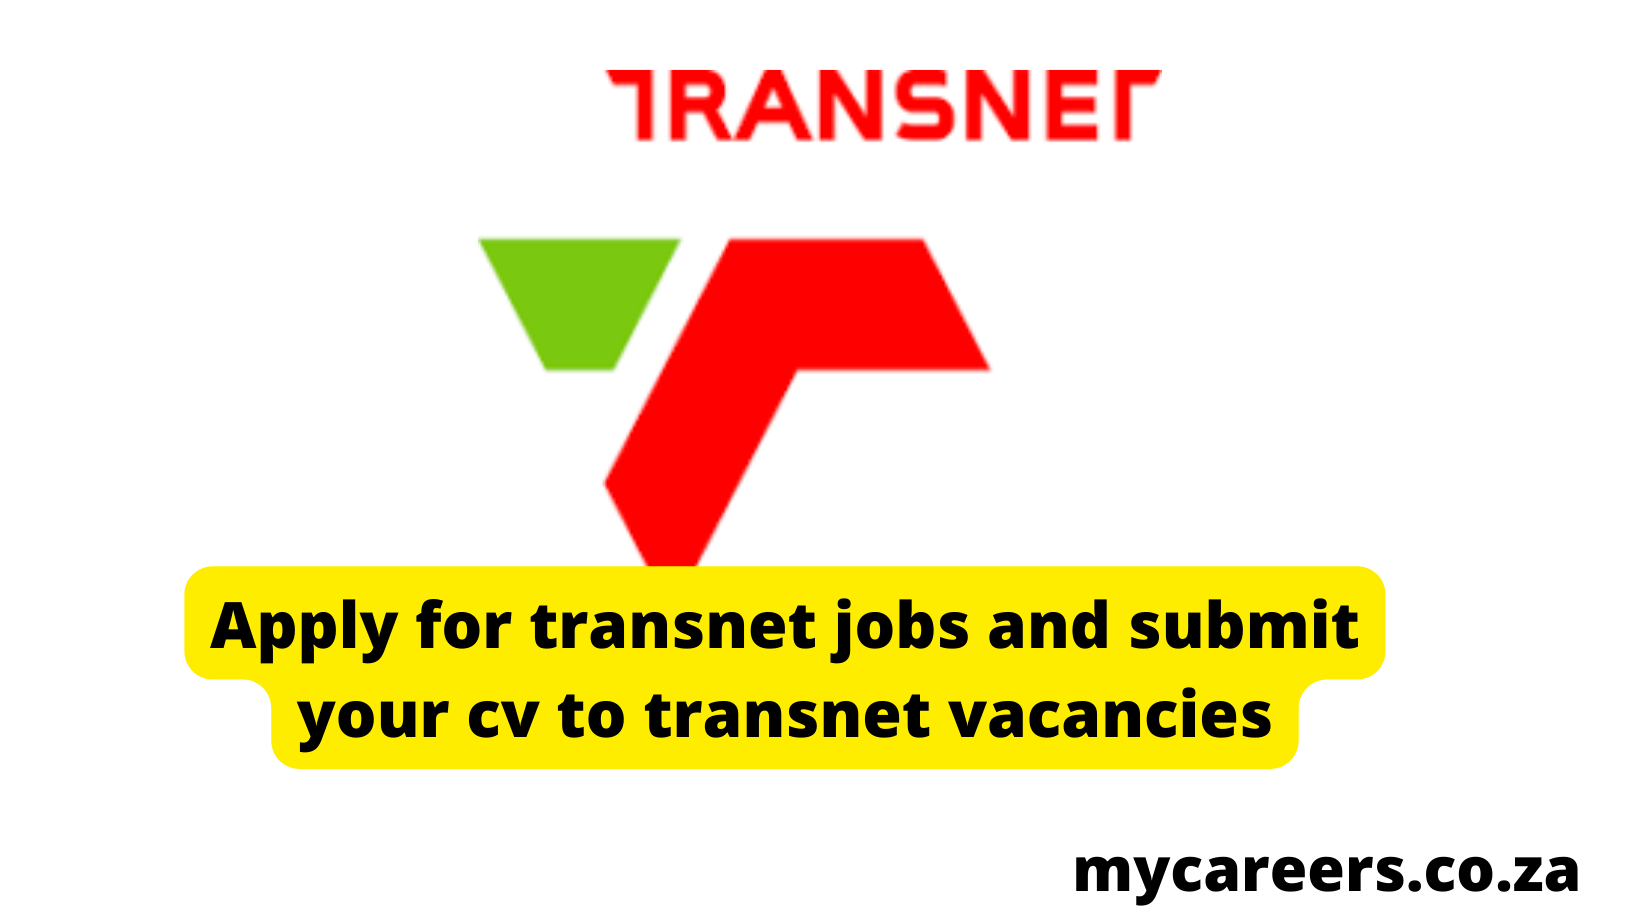 Applying for Transnet Jobs and Careers: A Comprehensive Guide